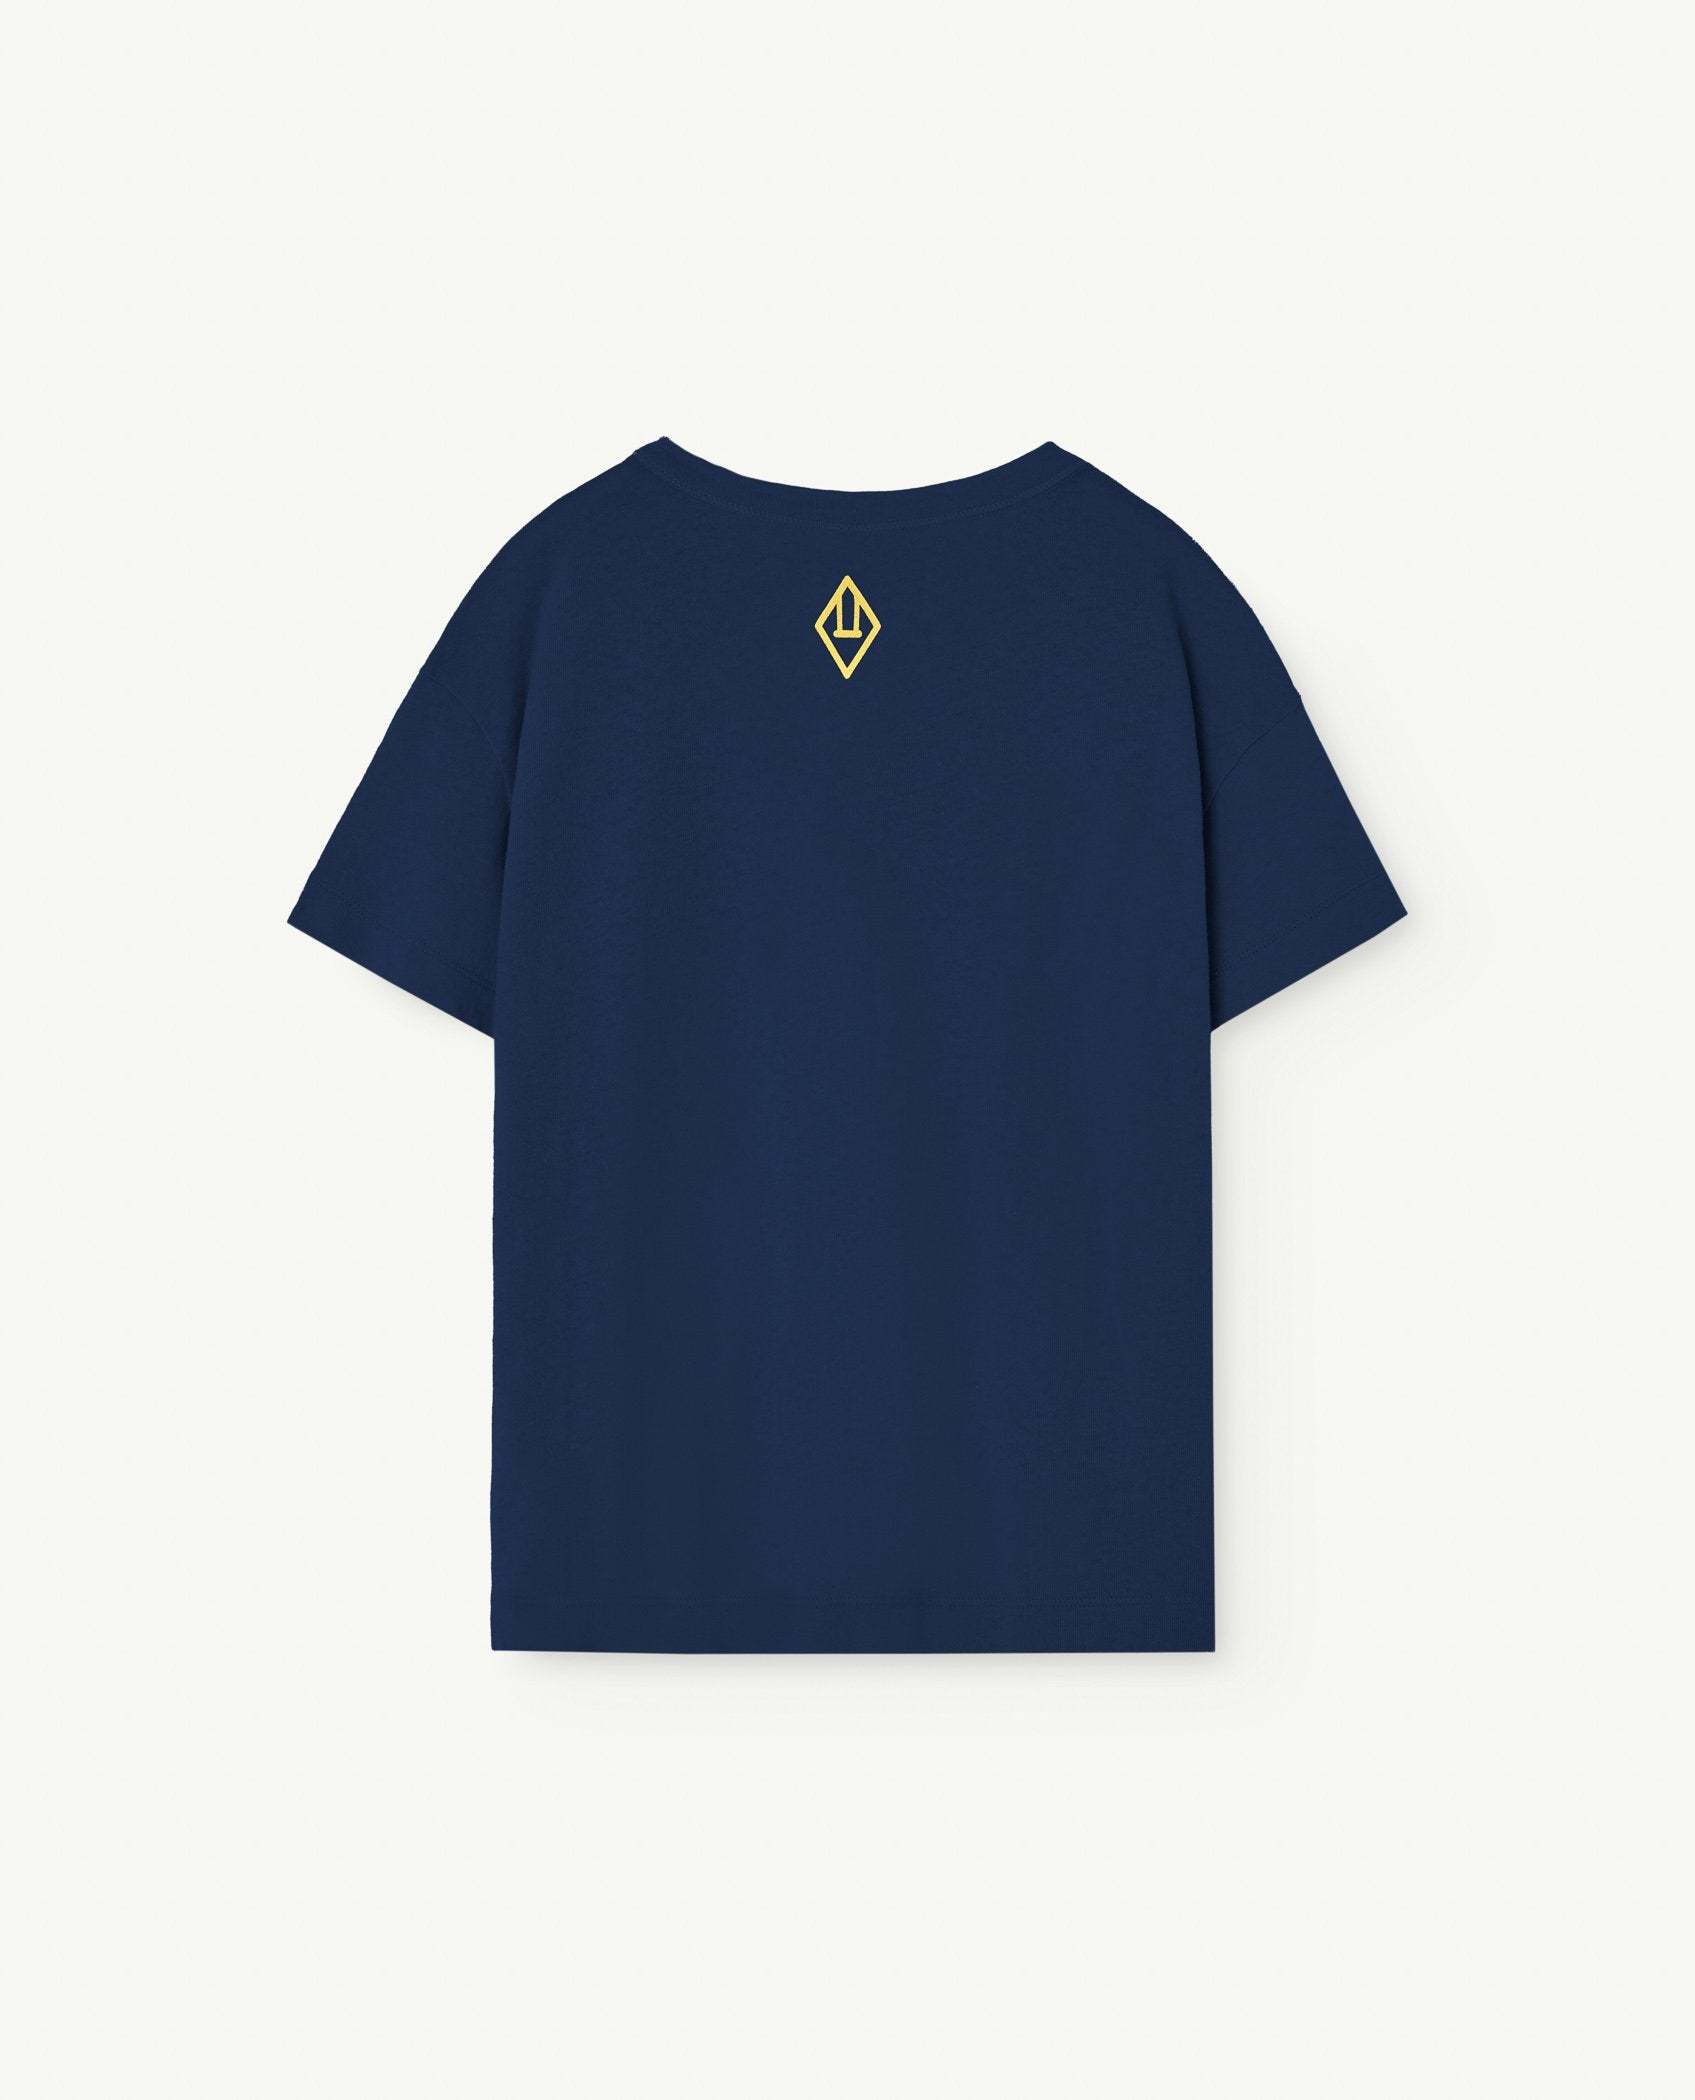 Navy Orion Kids T-Shirt PRODUCT BACK